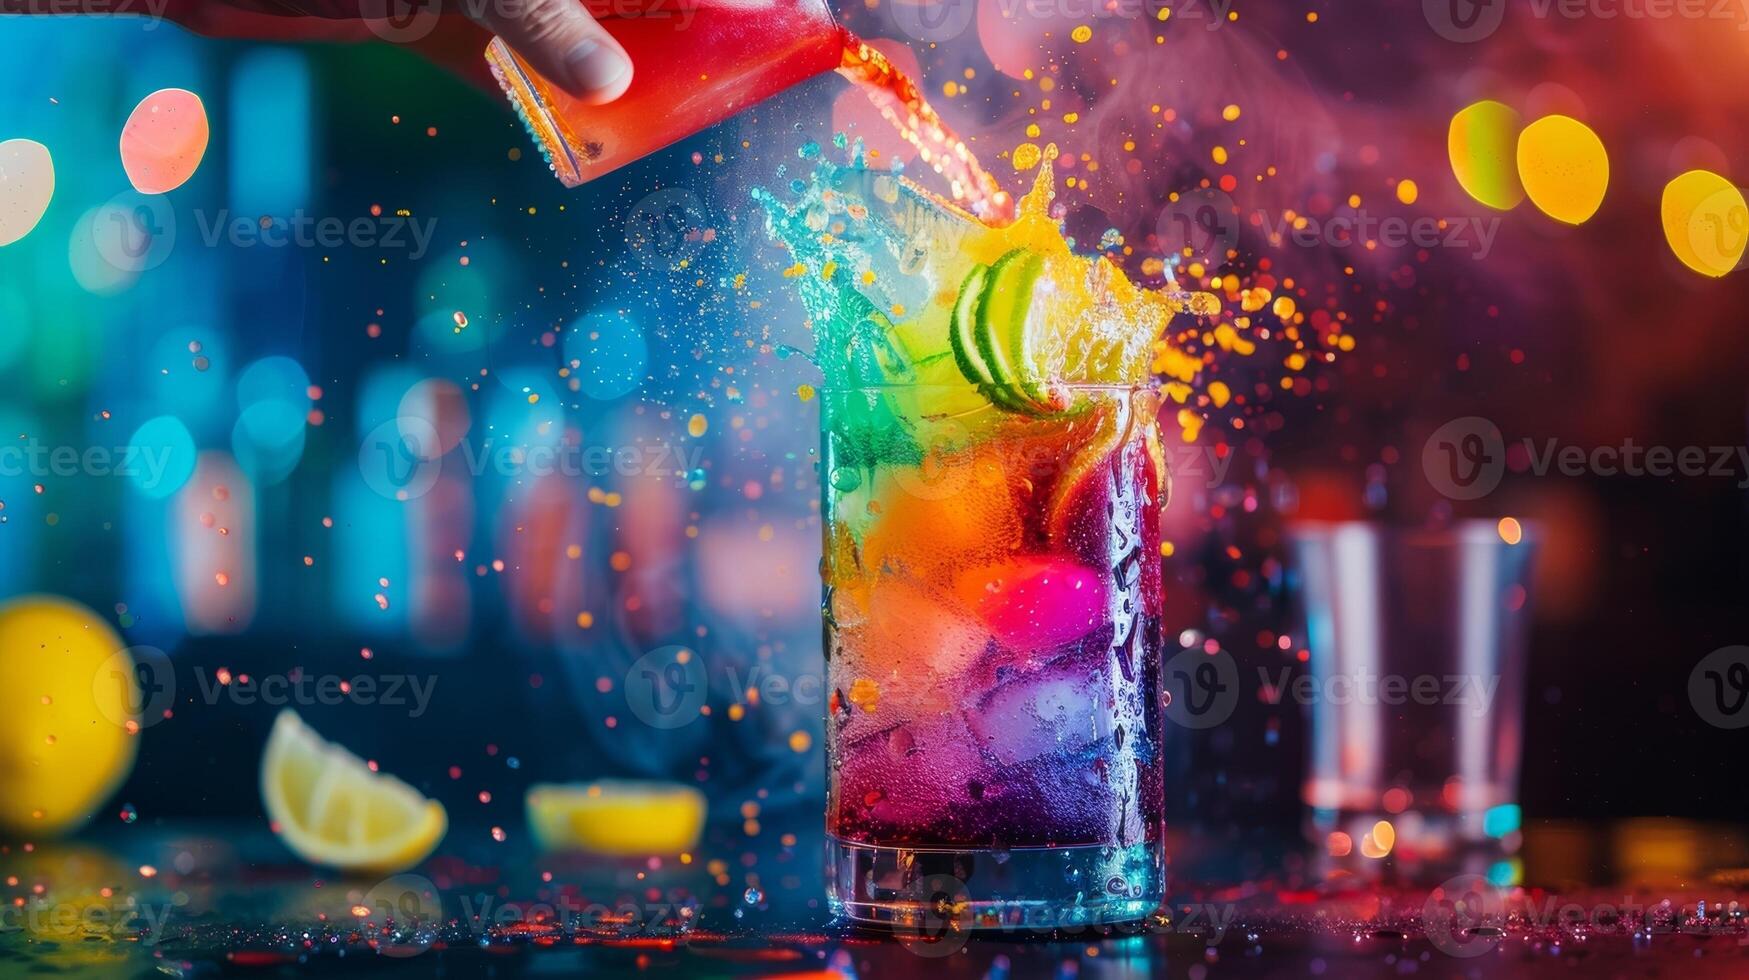 The audience watches in amazement as the magician skillfully blends ingredients in a shaker and pours out colorful mocktails that seem to appear out of thin air photo